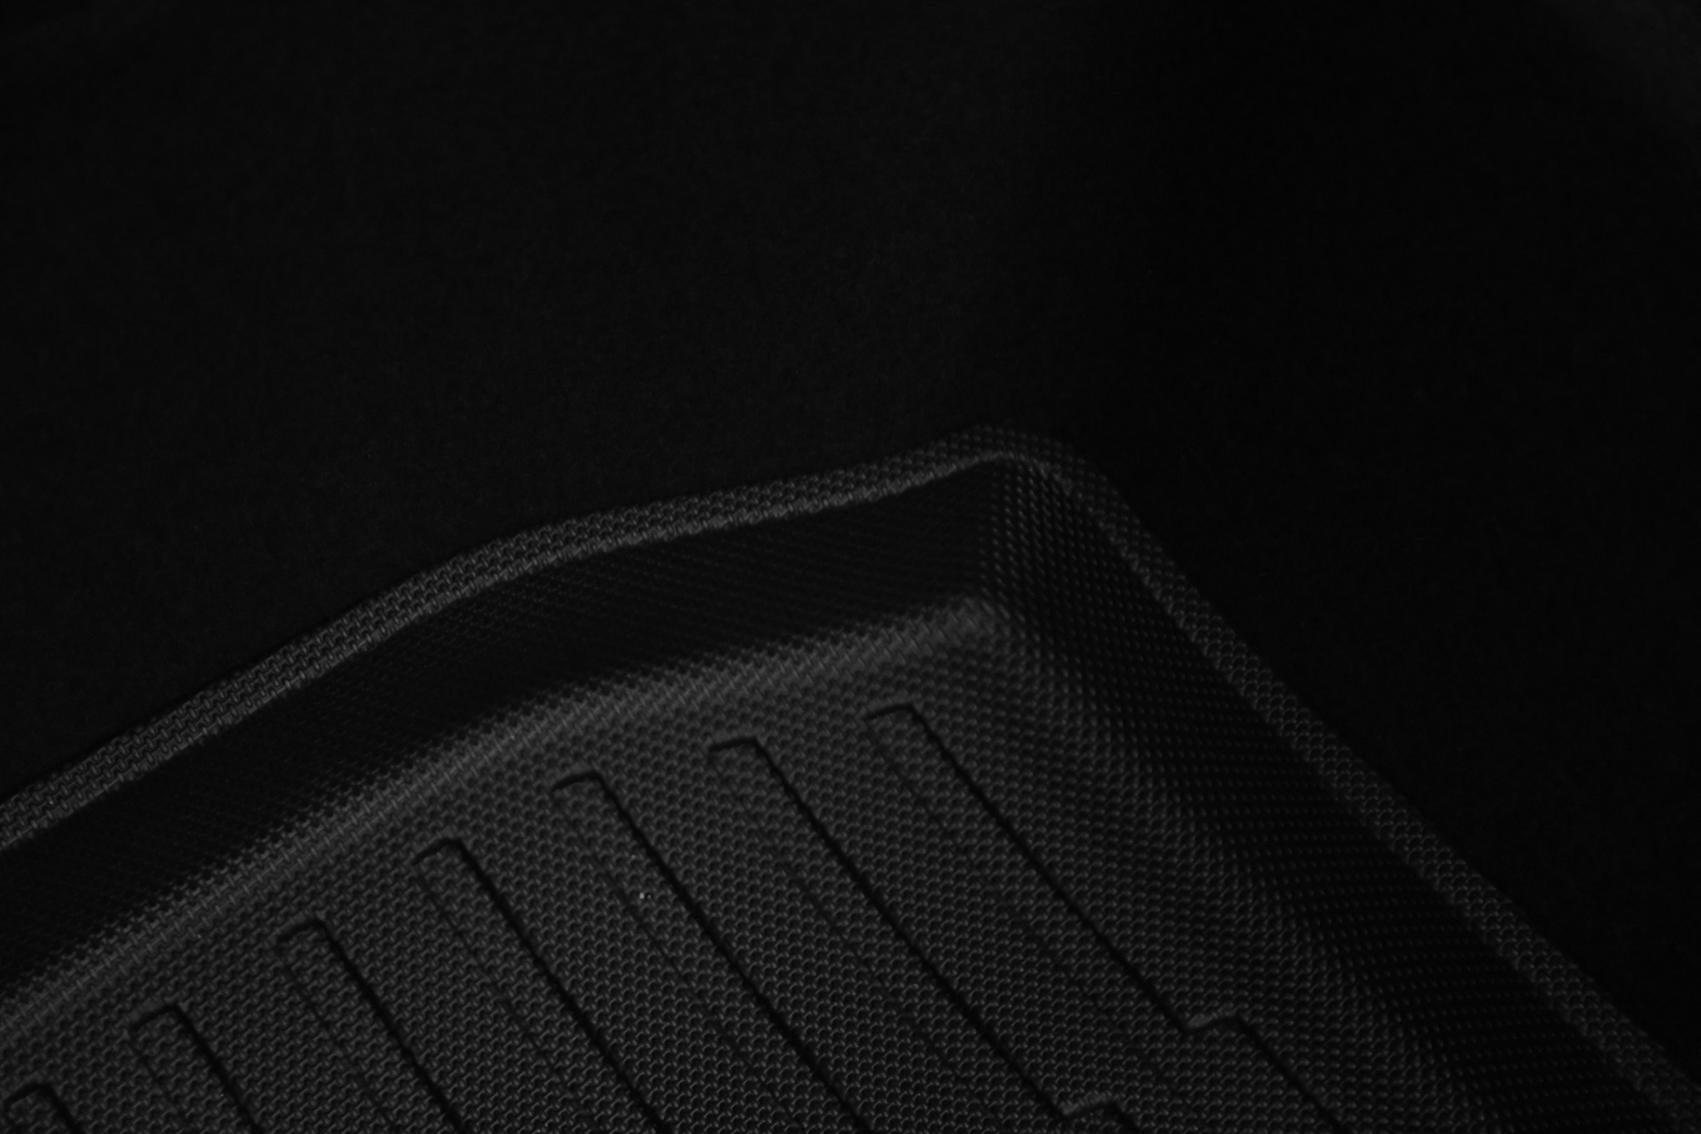 Lower Boot Mat for Model 3 - TESDADDY